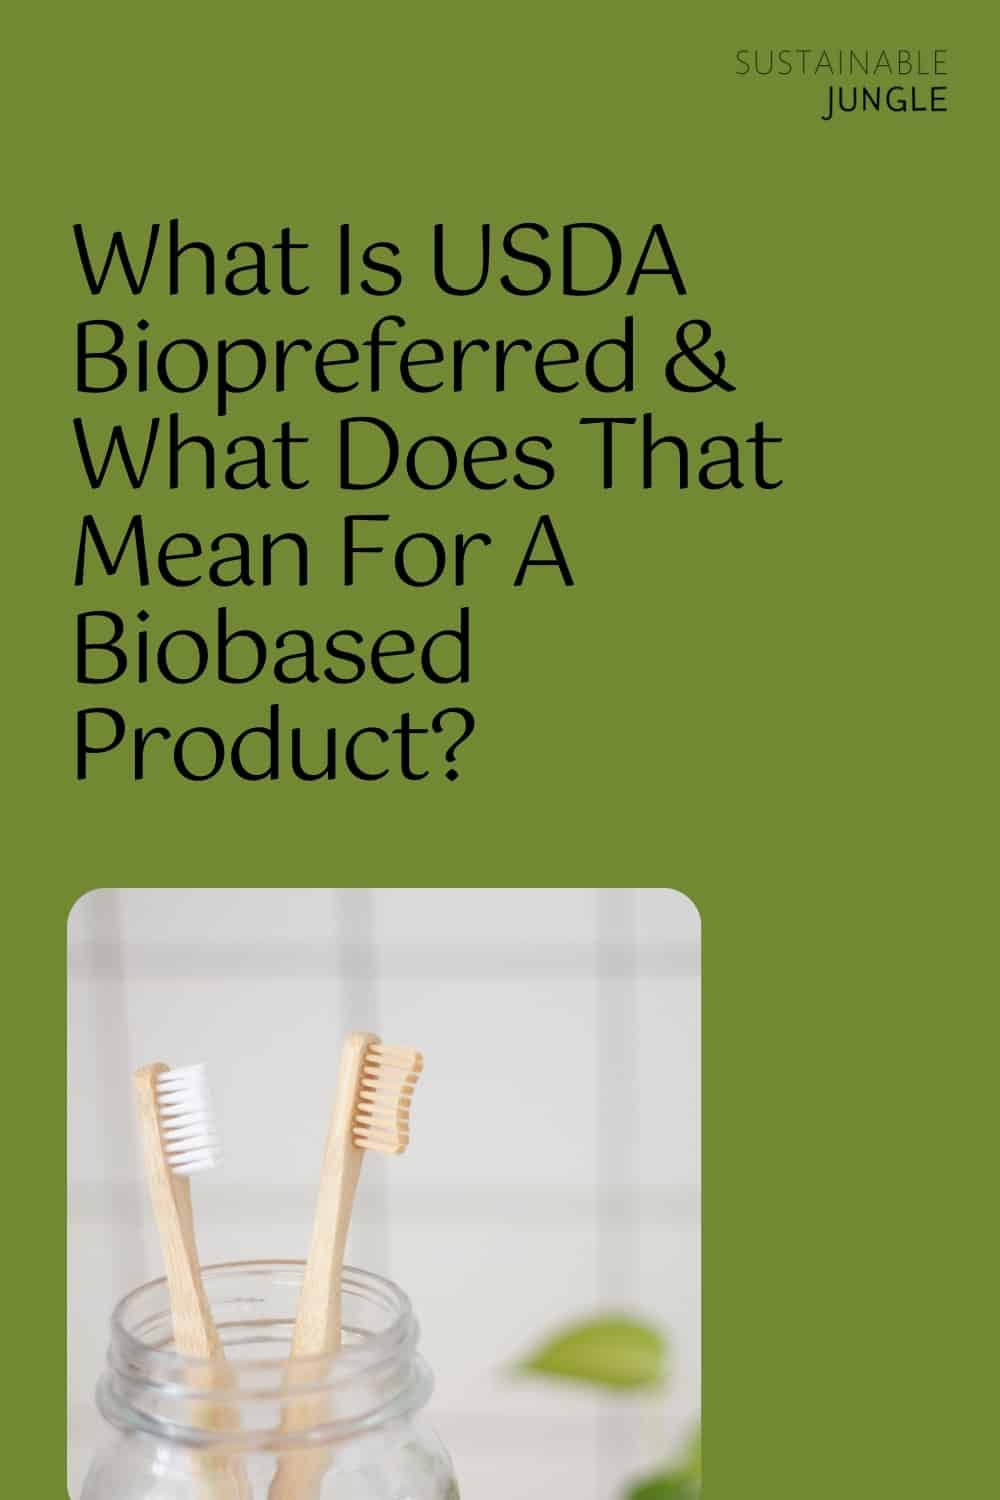 What Is USDA Biopreferred And What Does That Mean For A Biobased Product? #USDAbiopreferred #USDAbiopreferredlabel #USDAbiopreferredprogram #USDAbiopreferredproducts #isUSDAbiopreferredsustainable #howsustainableisUSDAbiopreferred #USDAbiobased #USDAbiobasedproduct #USDAcertifiedbiobasedproduct #sustainablejungle Image by Superkitina via Unsplash